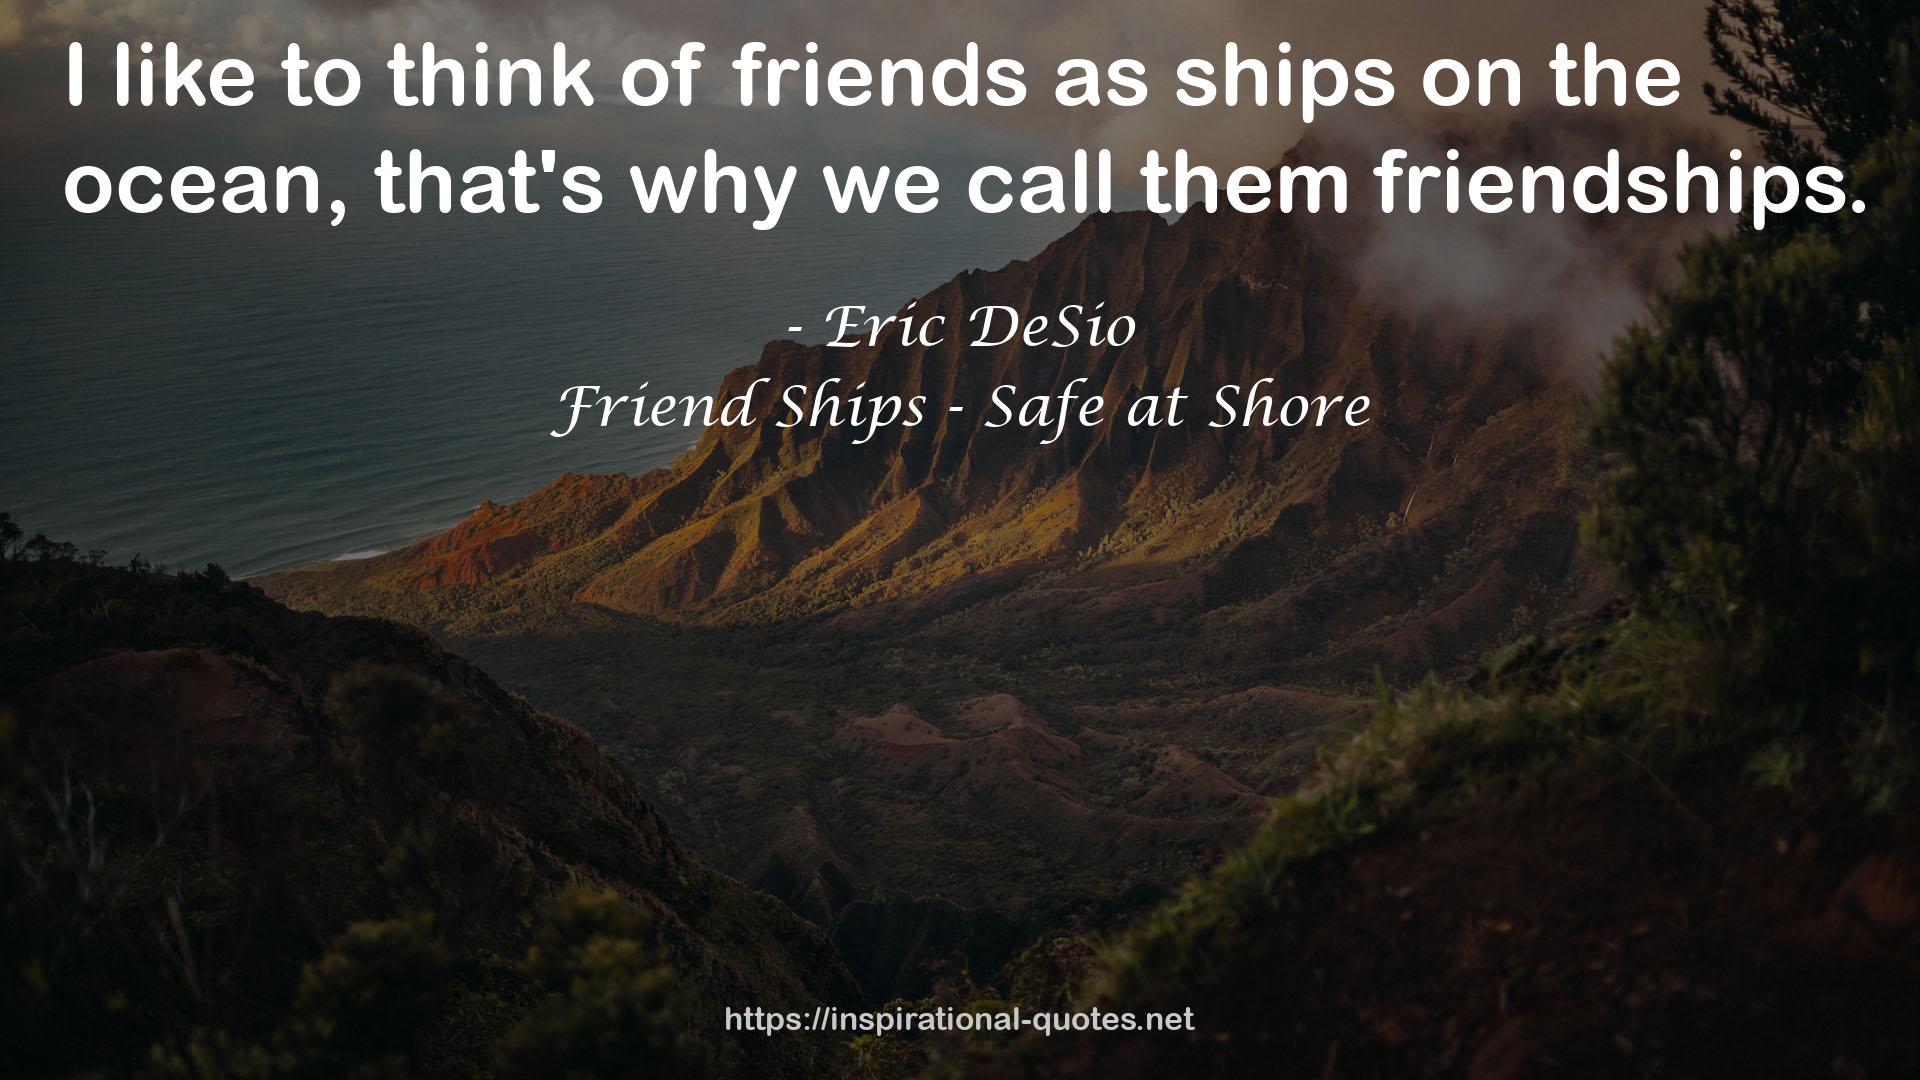 Friend Ships - Safe at Shore QUOTES